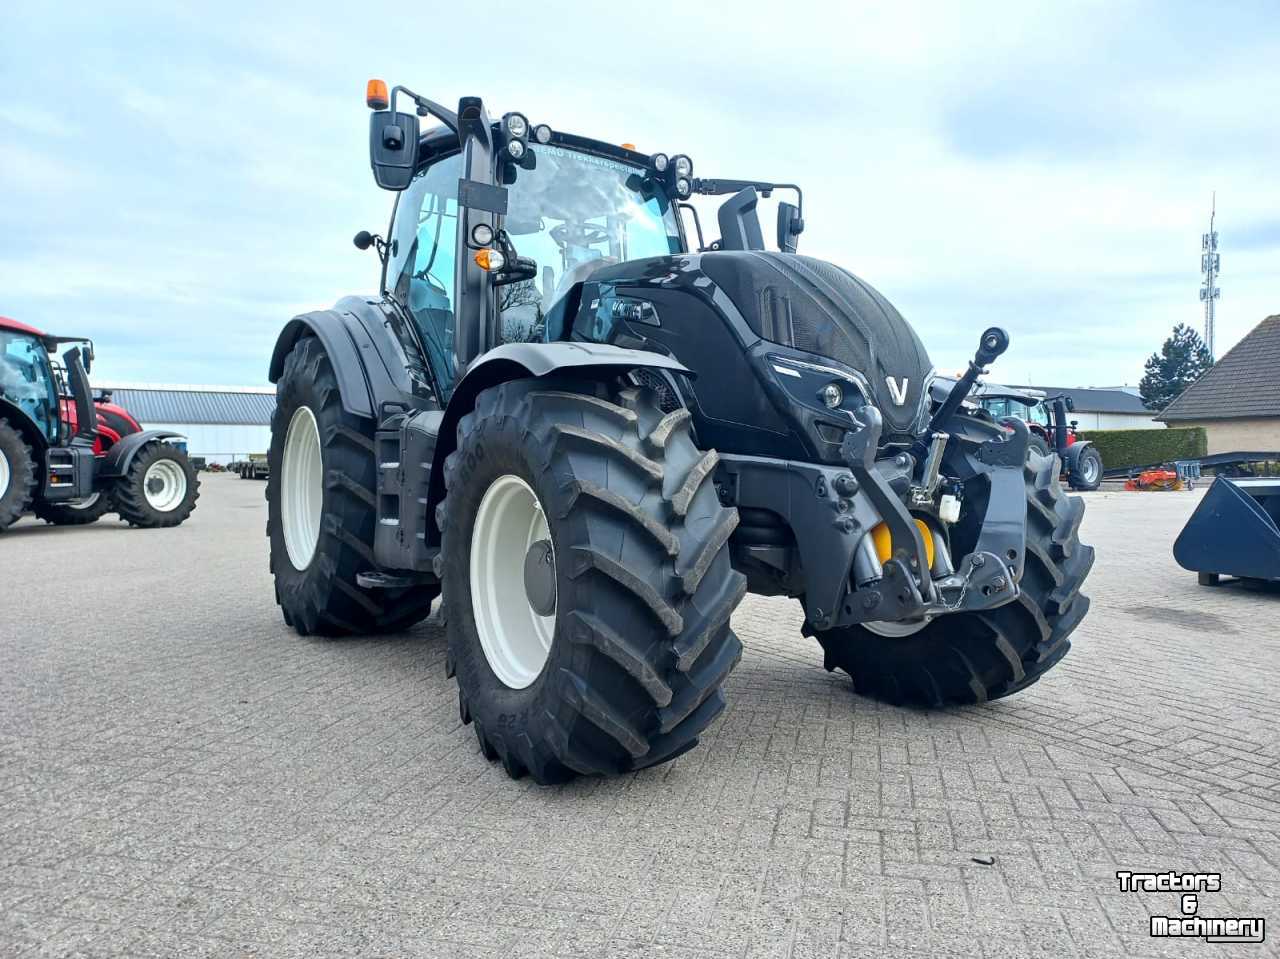 Tractors Valtra T174 Direct Smart Touch GPS, 2021, 450 uur!